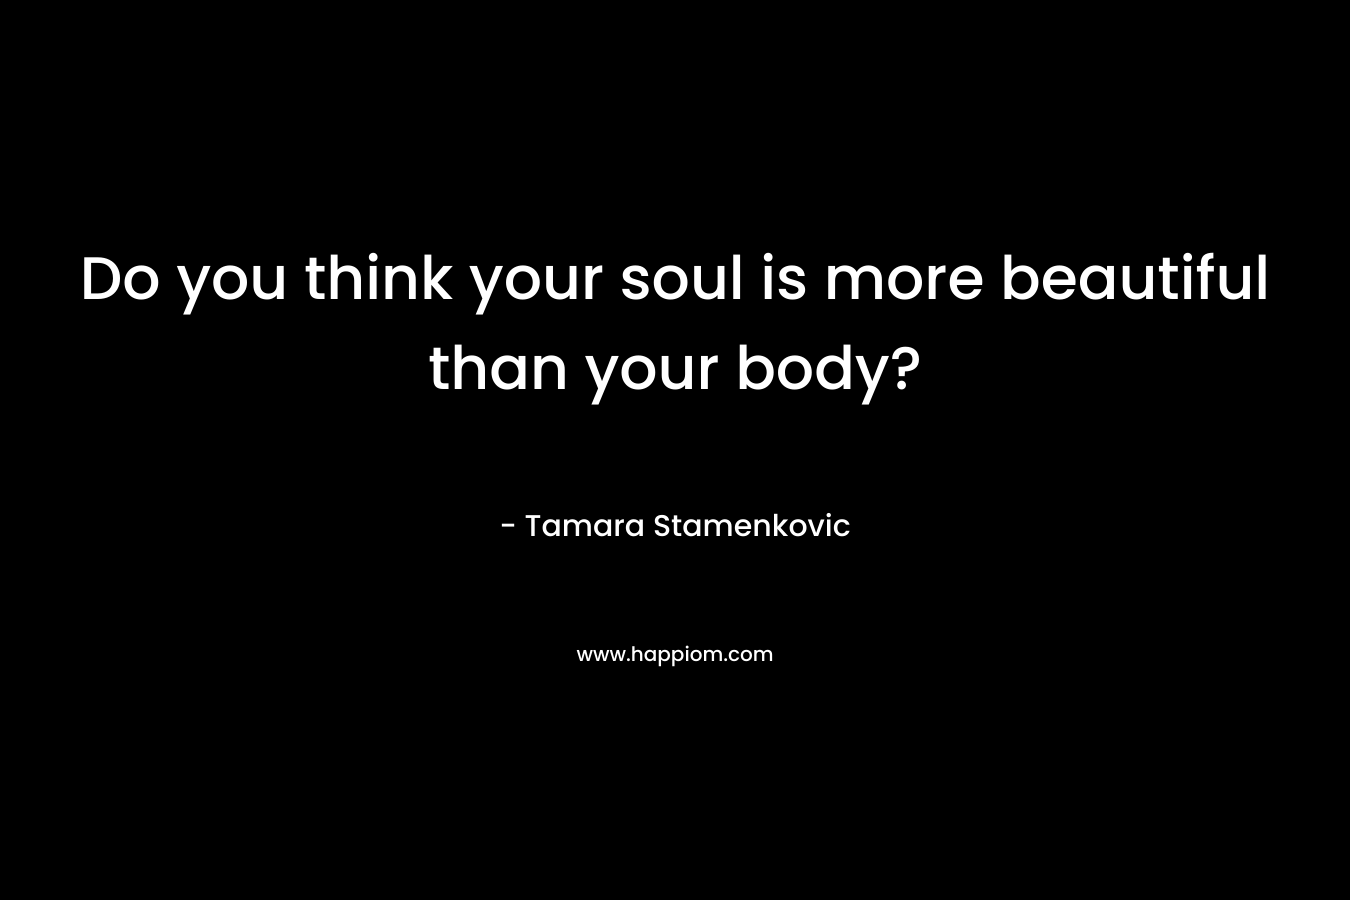 Do you think your soul is more beautiful than your body? – Tamara Stamenkovic